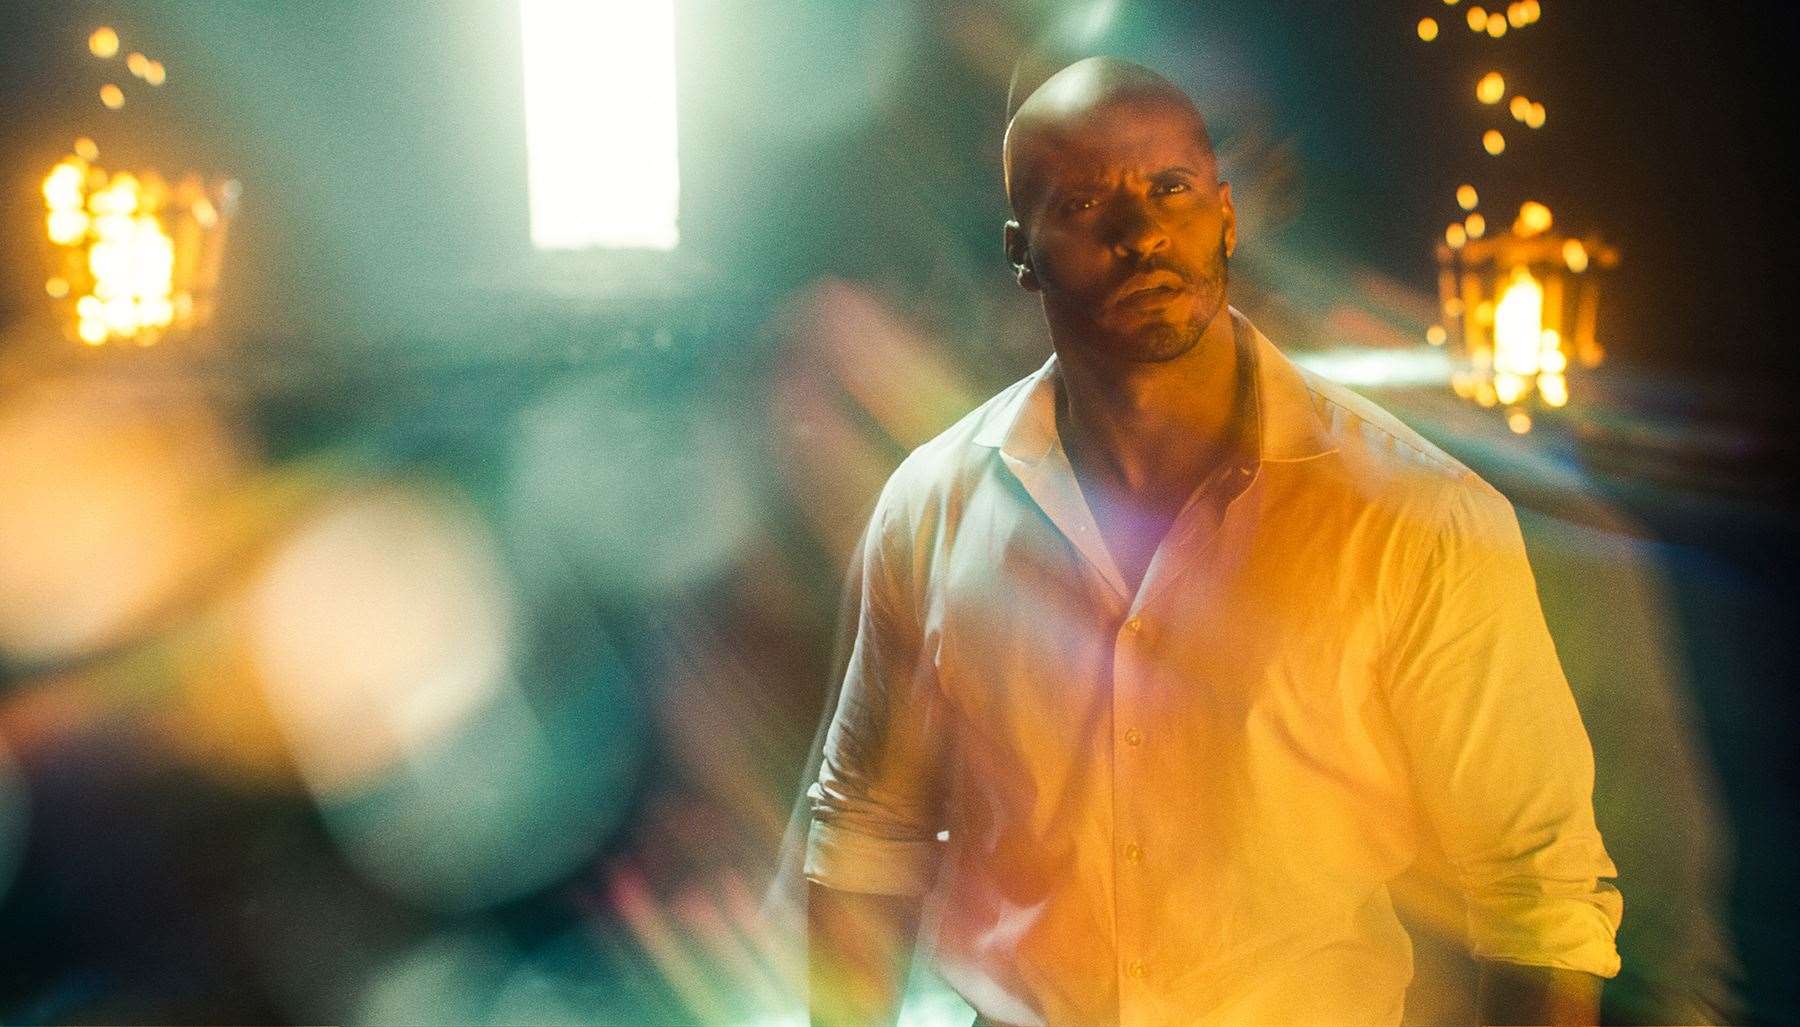 Ricky Whittle says American Gods is "more beautiful" than Game of Thrones.